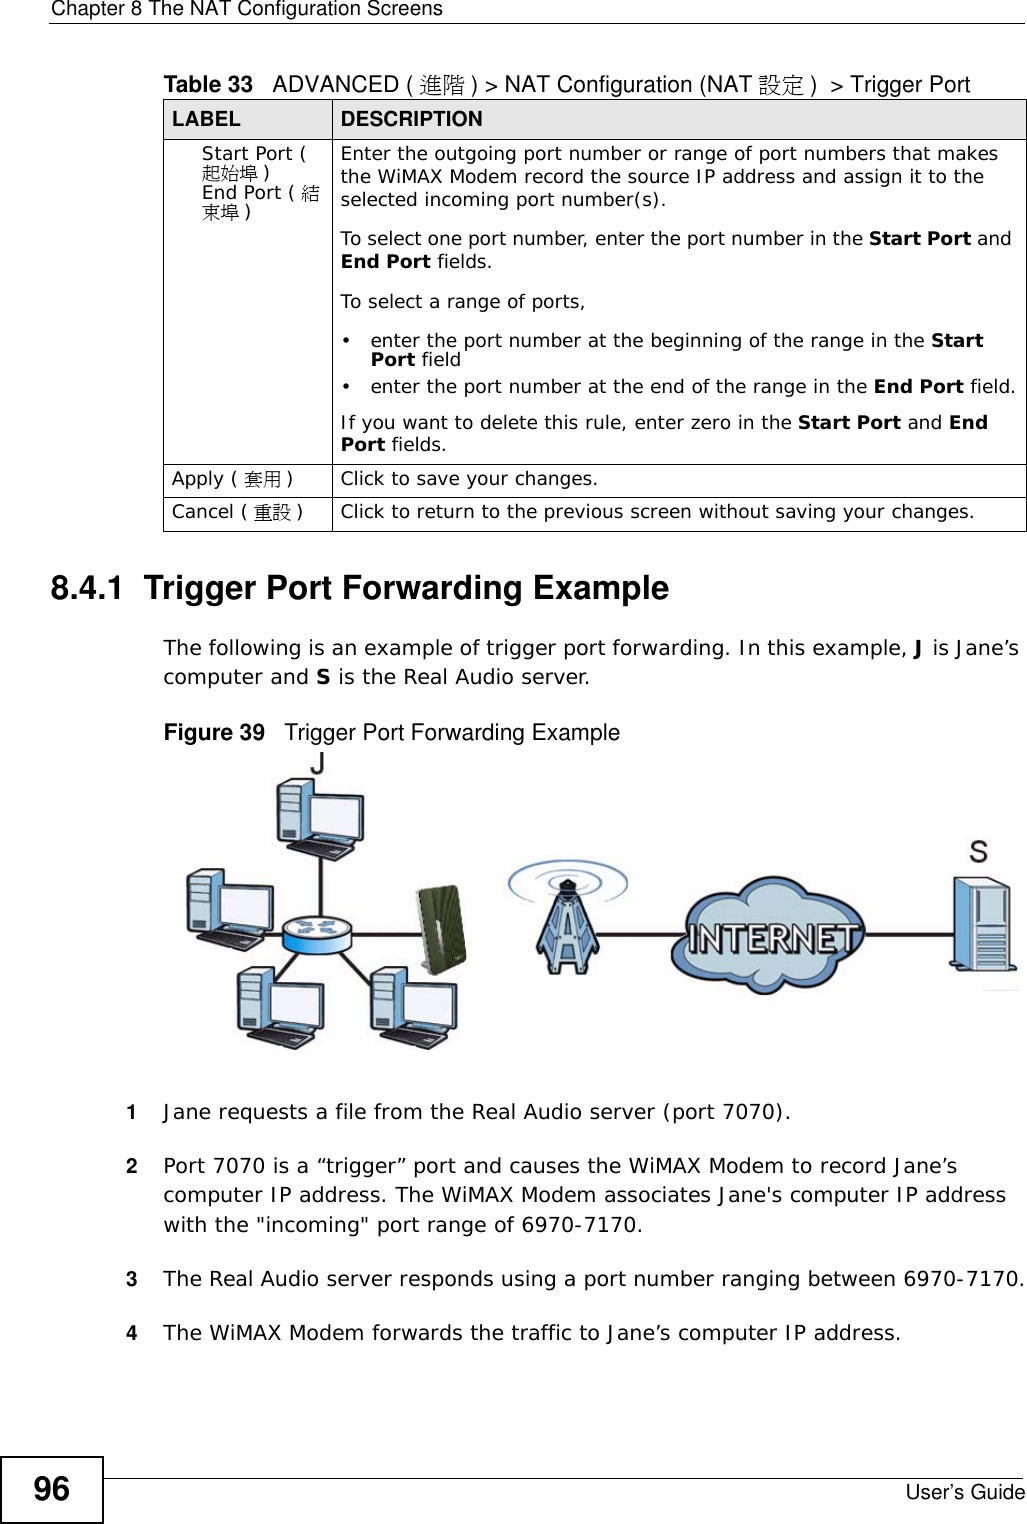 Chapter 8 The NAT Configuration ScreensUser’s Guide968.4.1  Trigger Port Forwarding ExampleThe following is an example of trigger port forwarding. In this example, J is Jane’s computer and S is the Real Audio server.Figure 39   Trigger Port Forwarding Example1Jane requests a file from the Real Audio server (port 7070).2Port 7070 is a “trigger” port and causes the WiMAX Modem to record Jane’s computer IP address. The WiMAX Modem associates Jane&apos;s computer IP address with the &quot;incoming&quot; port range of 6970-7170.3The Real Audio server responds using a port number ranging between 6970-7170.4The WiMAX Modem forwards the traffic to Jane’s computer IP address. Start Port (起始埠 ) End Port ( 結束埠 )Enter the outgoing port number or range of port numbers that makes the WiMAX Modem record the source IP address and assign it to the selected incoming port number(s).To select one port number, enter the port number in the Start Port and End Port fields.To select a range of ports,• enter the port number at the beginning of the range in the Start Port field• enter the port number at the end of the range in the End Port field.If you want to delete this rule, enter zero in the Start Port and End Port fields.Apply ( 套用 )Click to save your changes.Cancel ( 重設 ) Click to return to the previous screen without saving your changes.Table 33   ADVANCED ( 進階 ) &gt; NAT Configuration (NAT 設定 )  &gt; Trigger Port LABEL DESCRIPTION